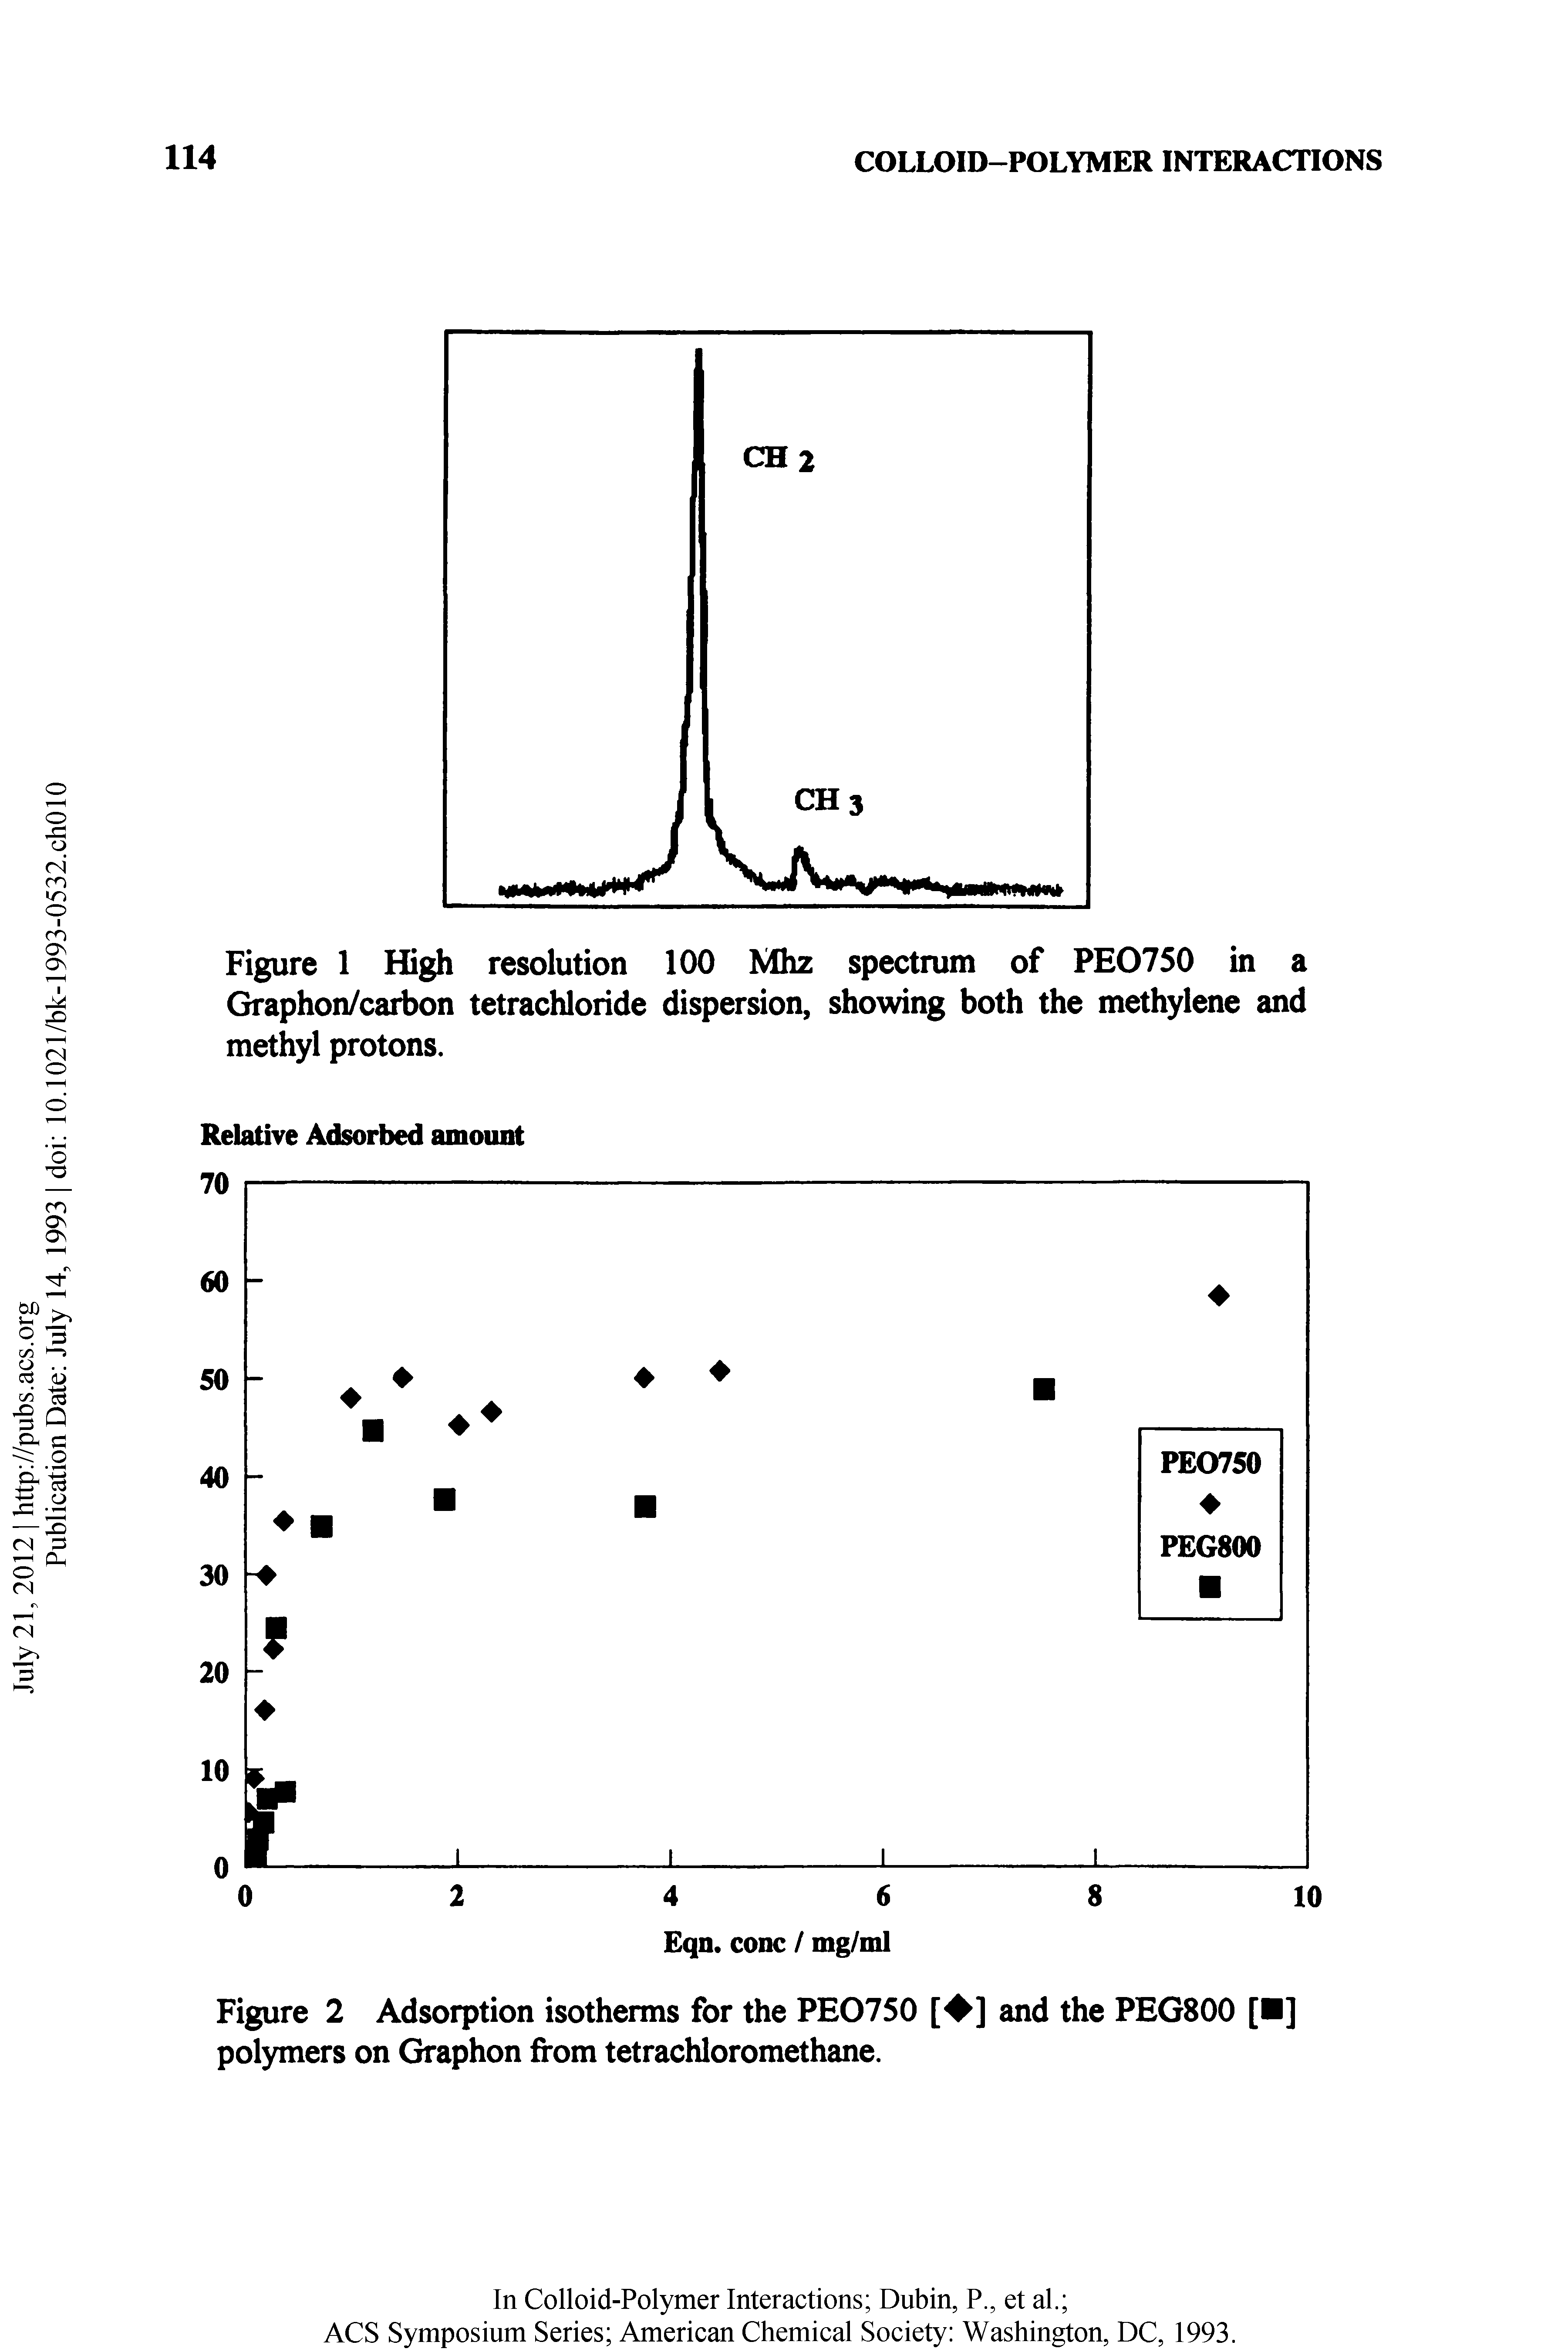 Figure 1 High resolution 100 Mhz spectrum of PEO750 in a Graphon/carbon tetrachloride dispersion, showing both the methylene and methyl protons.